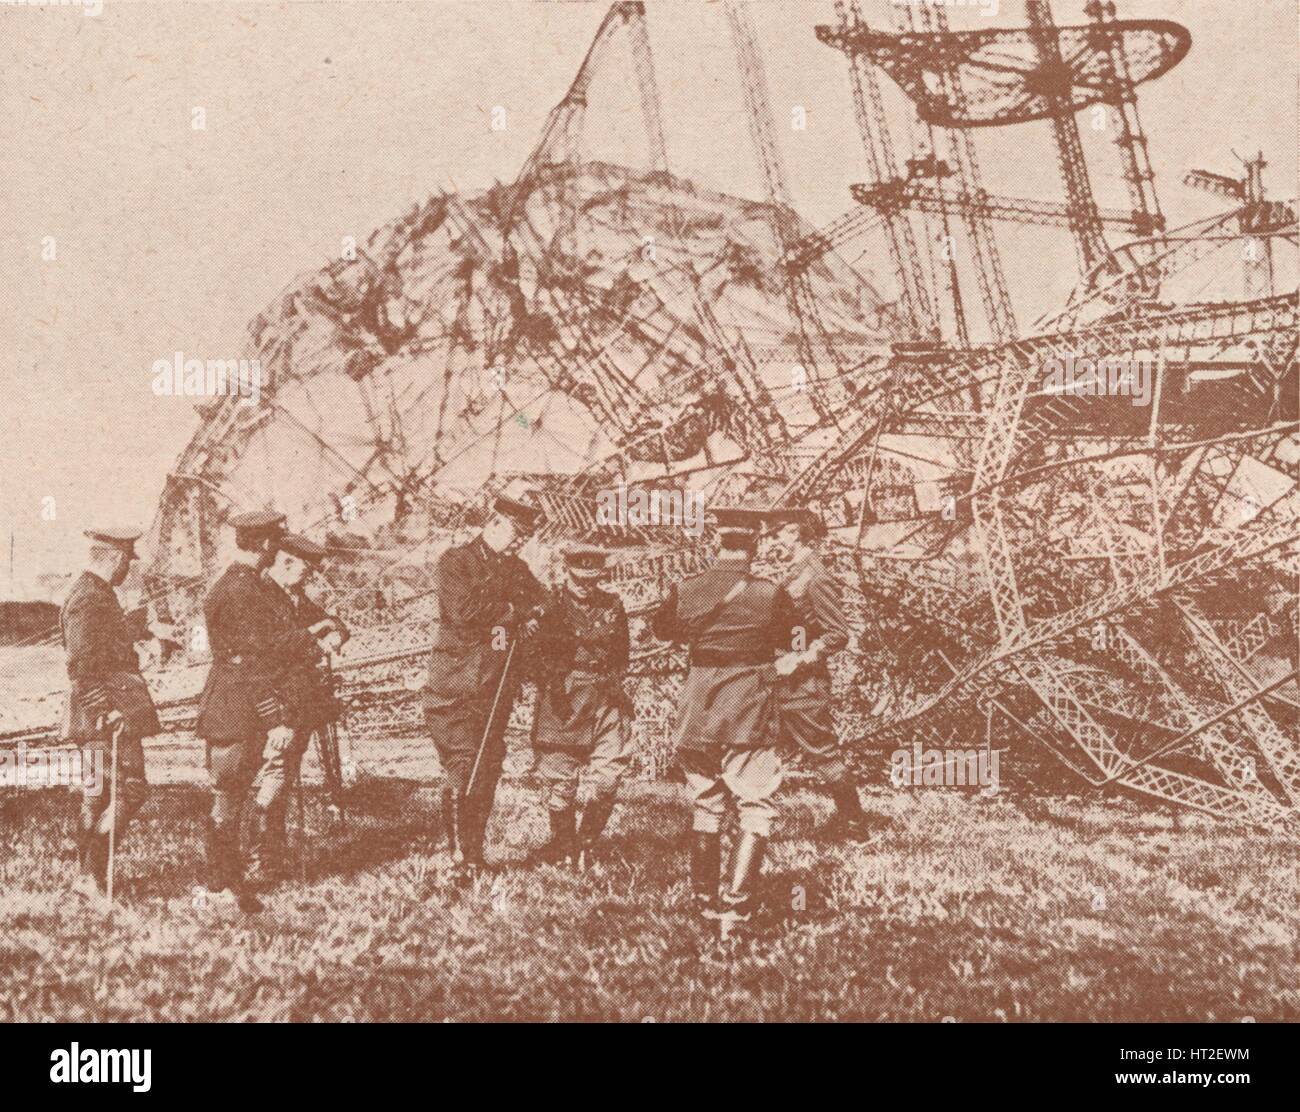 British staff officers examining the wreckage of a Zeppelin brought down in England, c1917 (1919). Artist: Unknown. Stock Photo